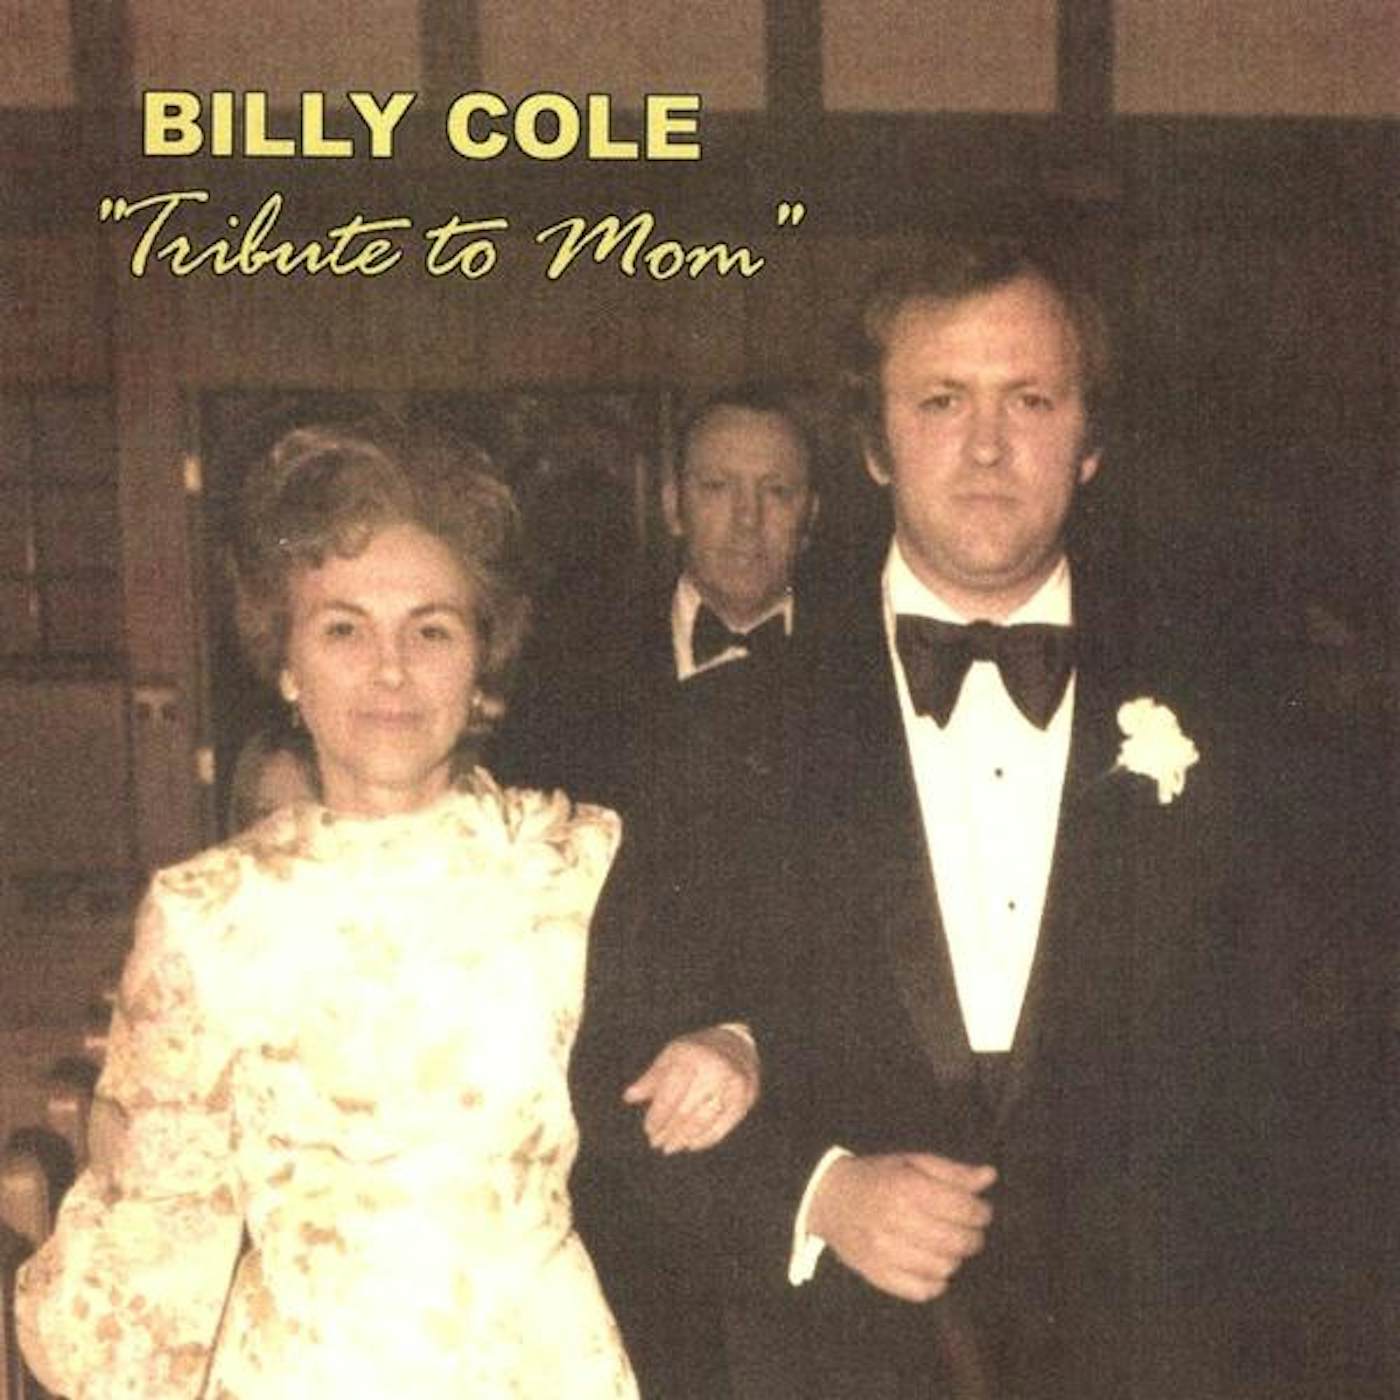 Billy Cole TRIBUTE TO MOM CD